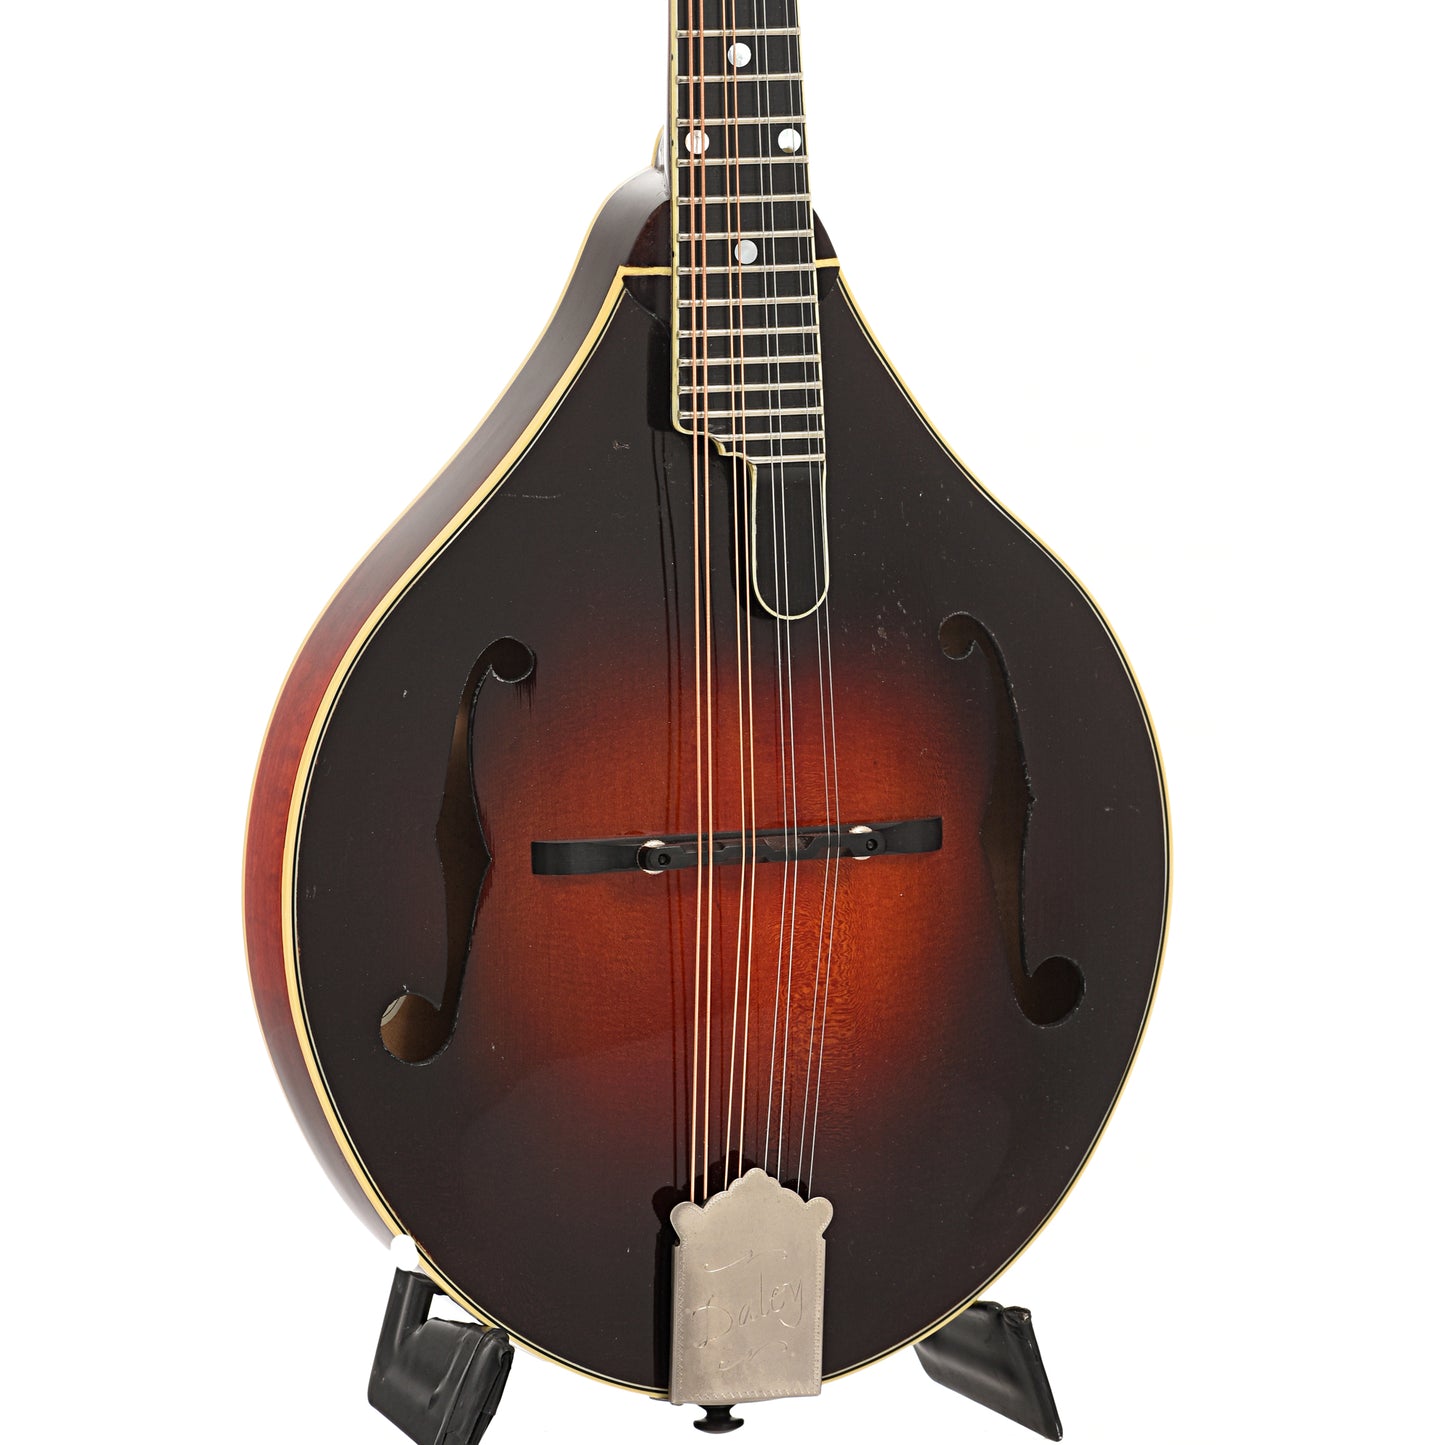 Front and side of Daley Classic A Mandolin